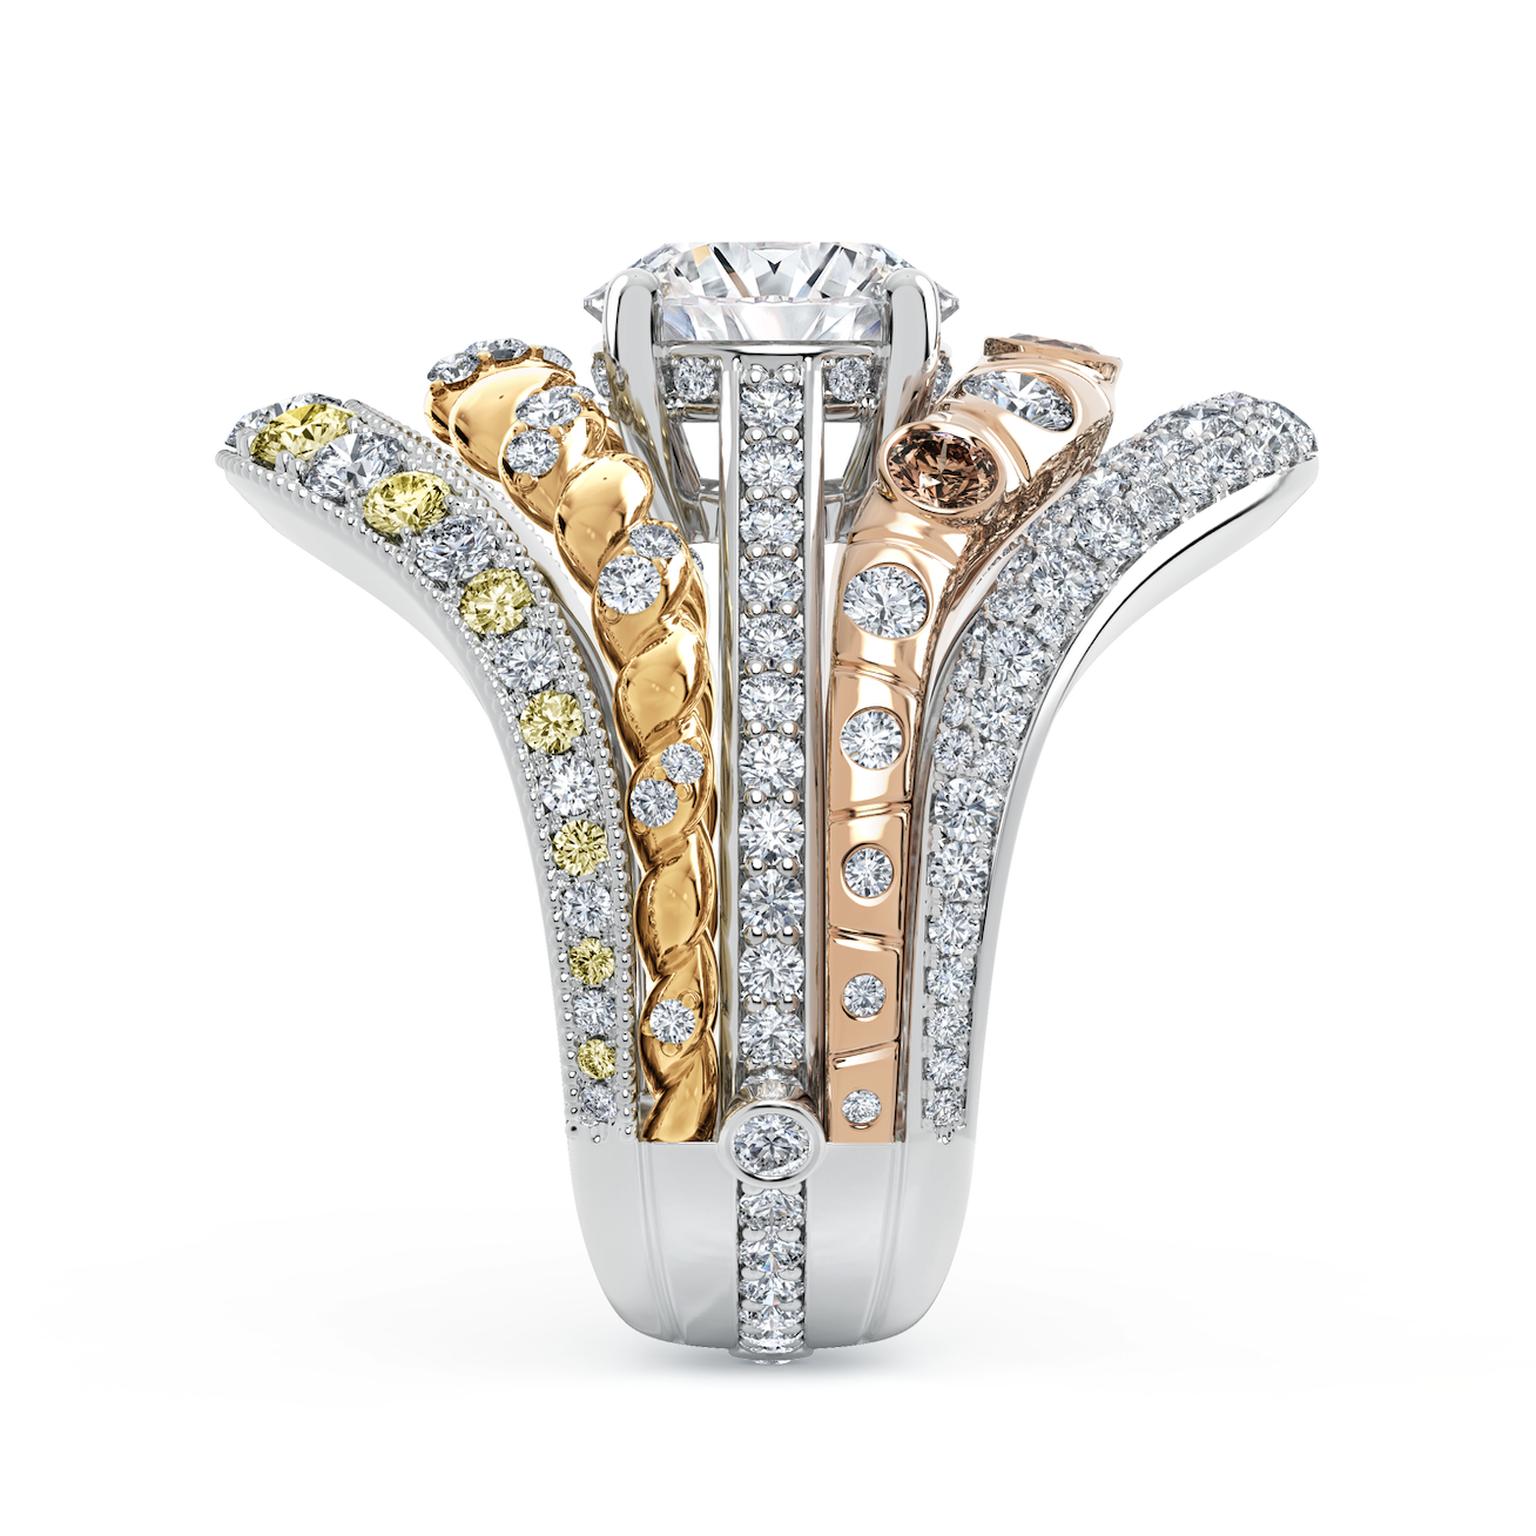 Prelude jacket ring solitaire by De Beers side view